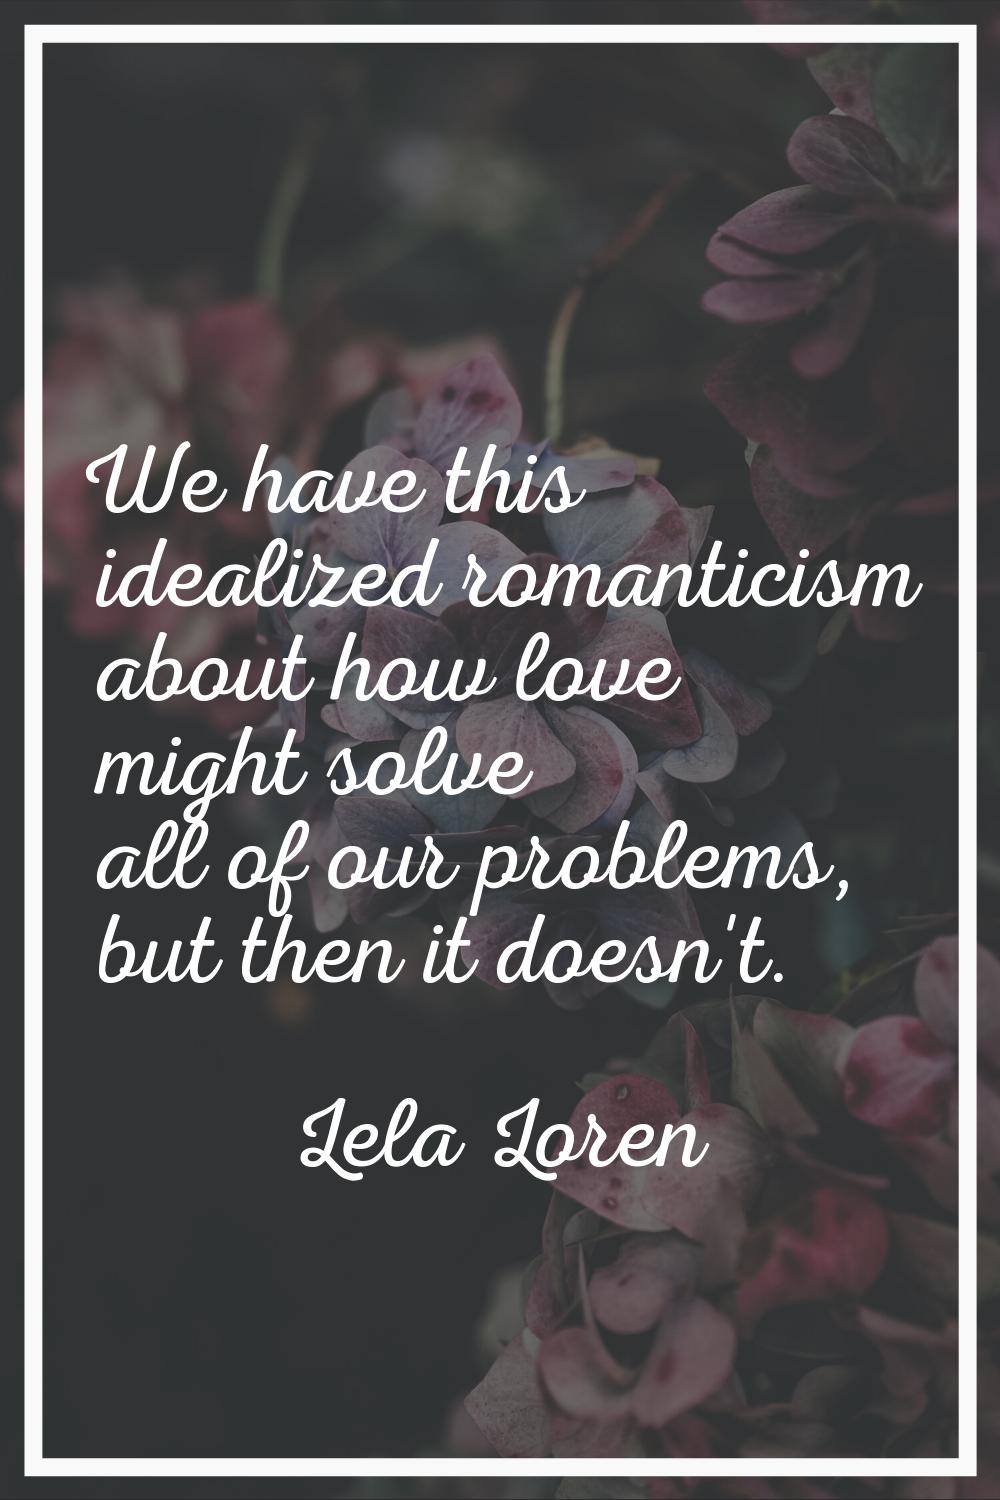 We have this idealized romanticism about how love might solve all of our problems, but then it does